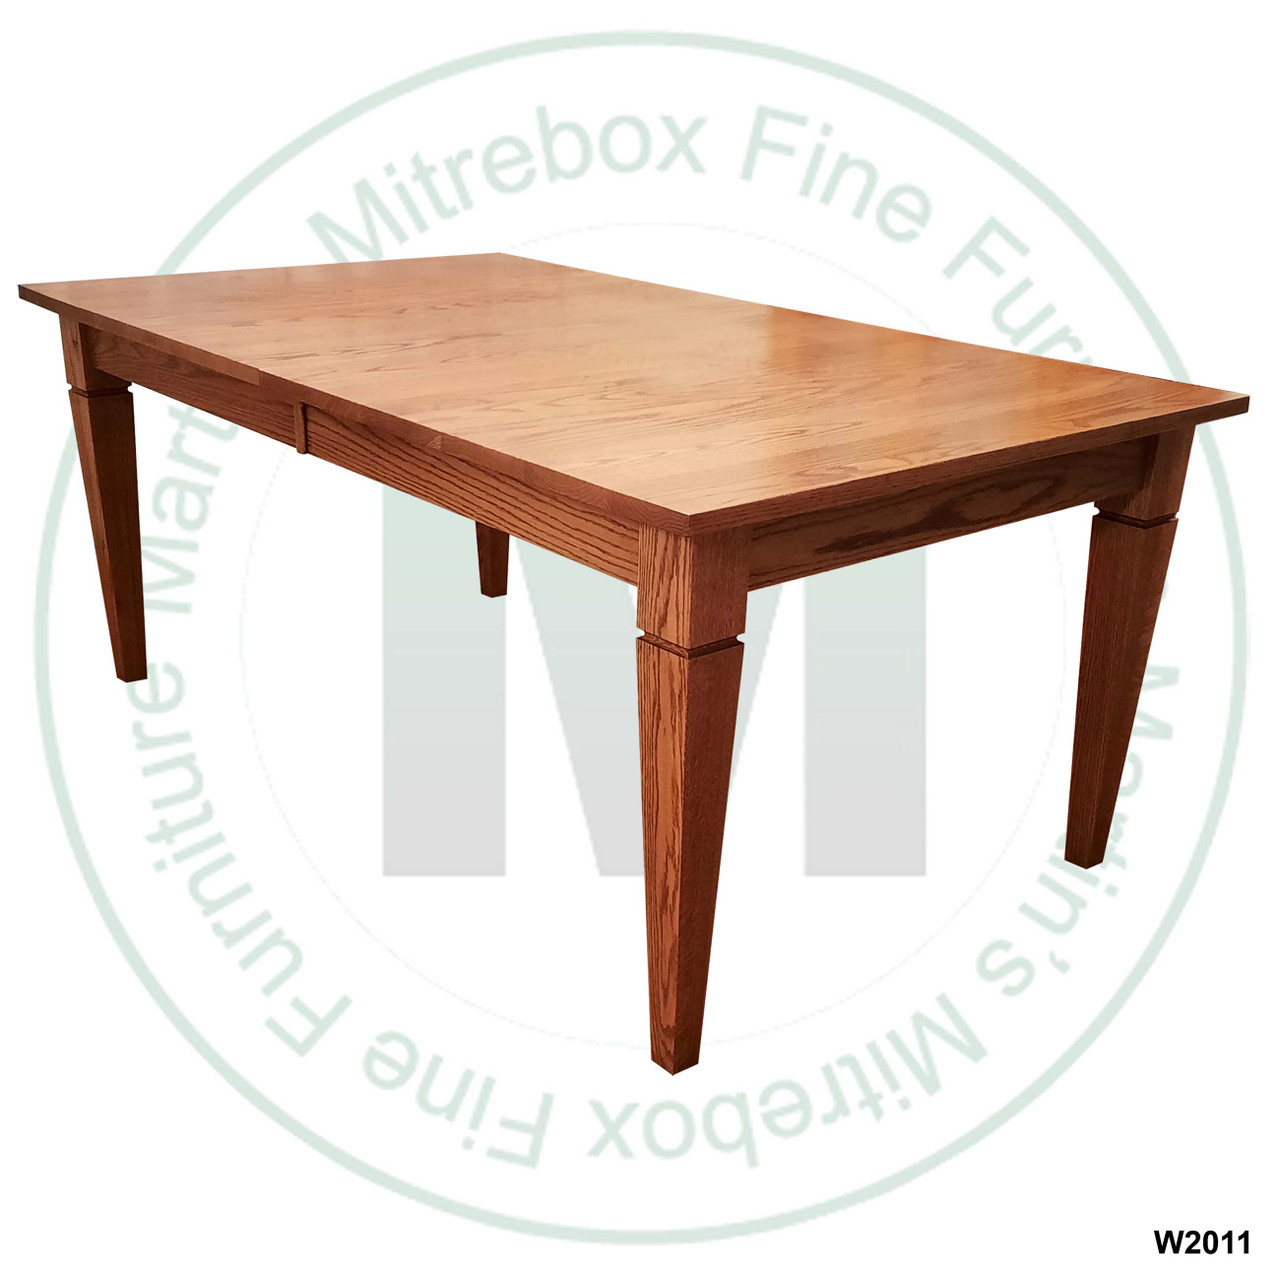 Oak Reesor Solid Top Harvest Table 48''D x 84''W x 30''H Table Has 1.25'' Thick Top